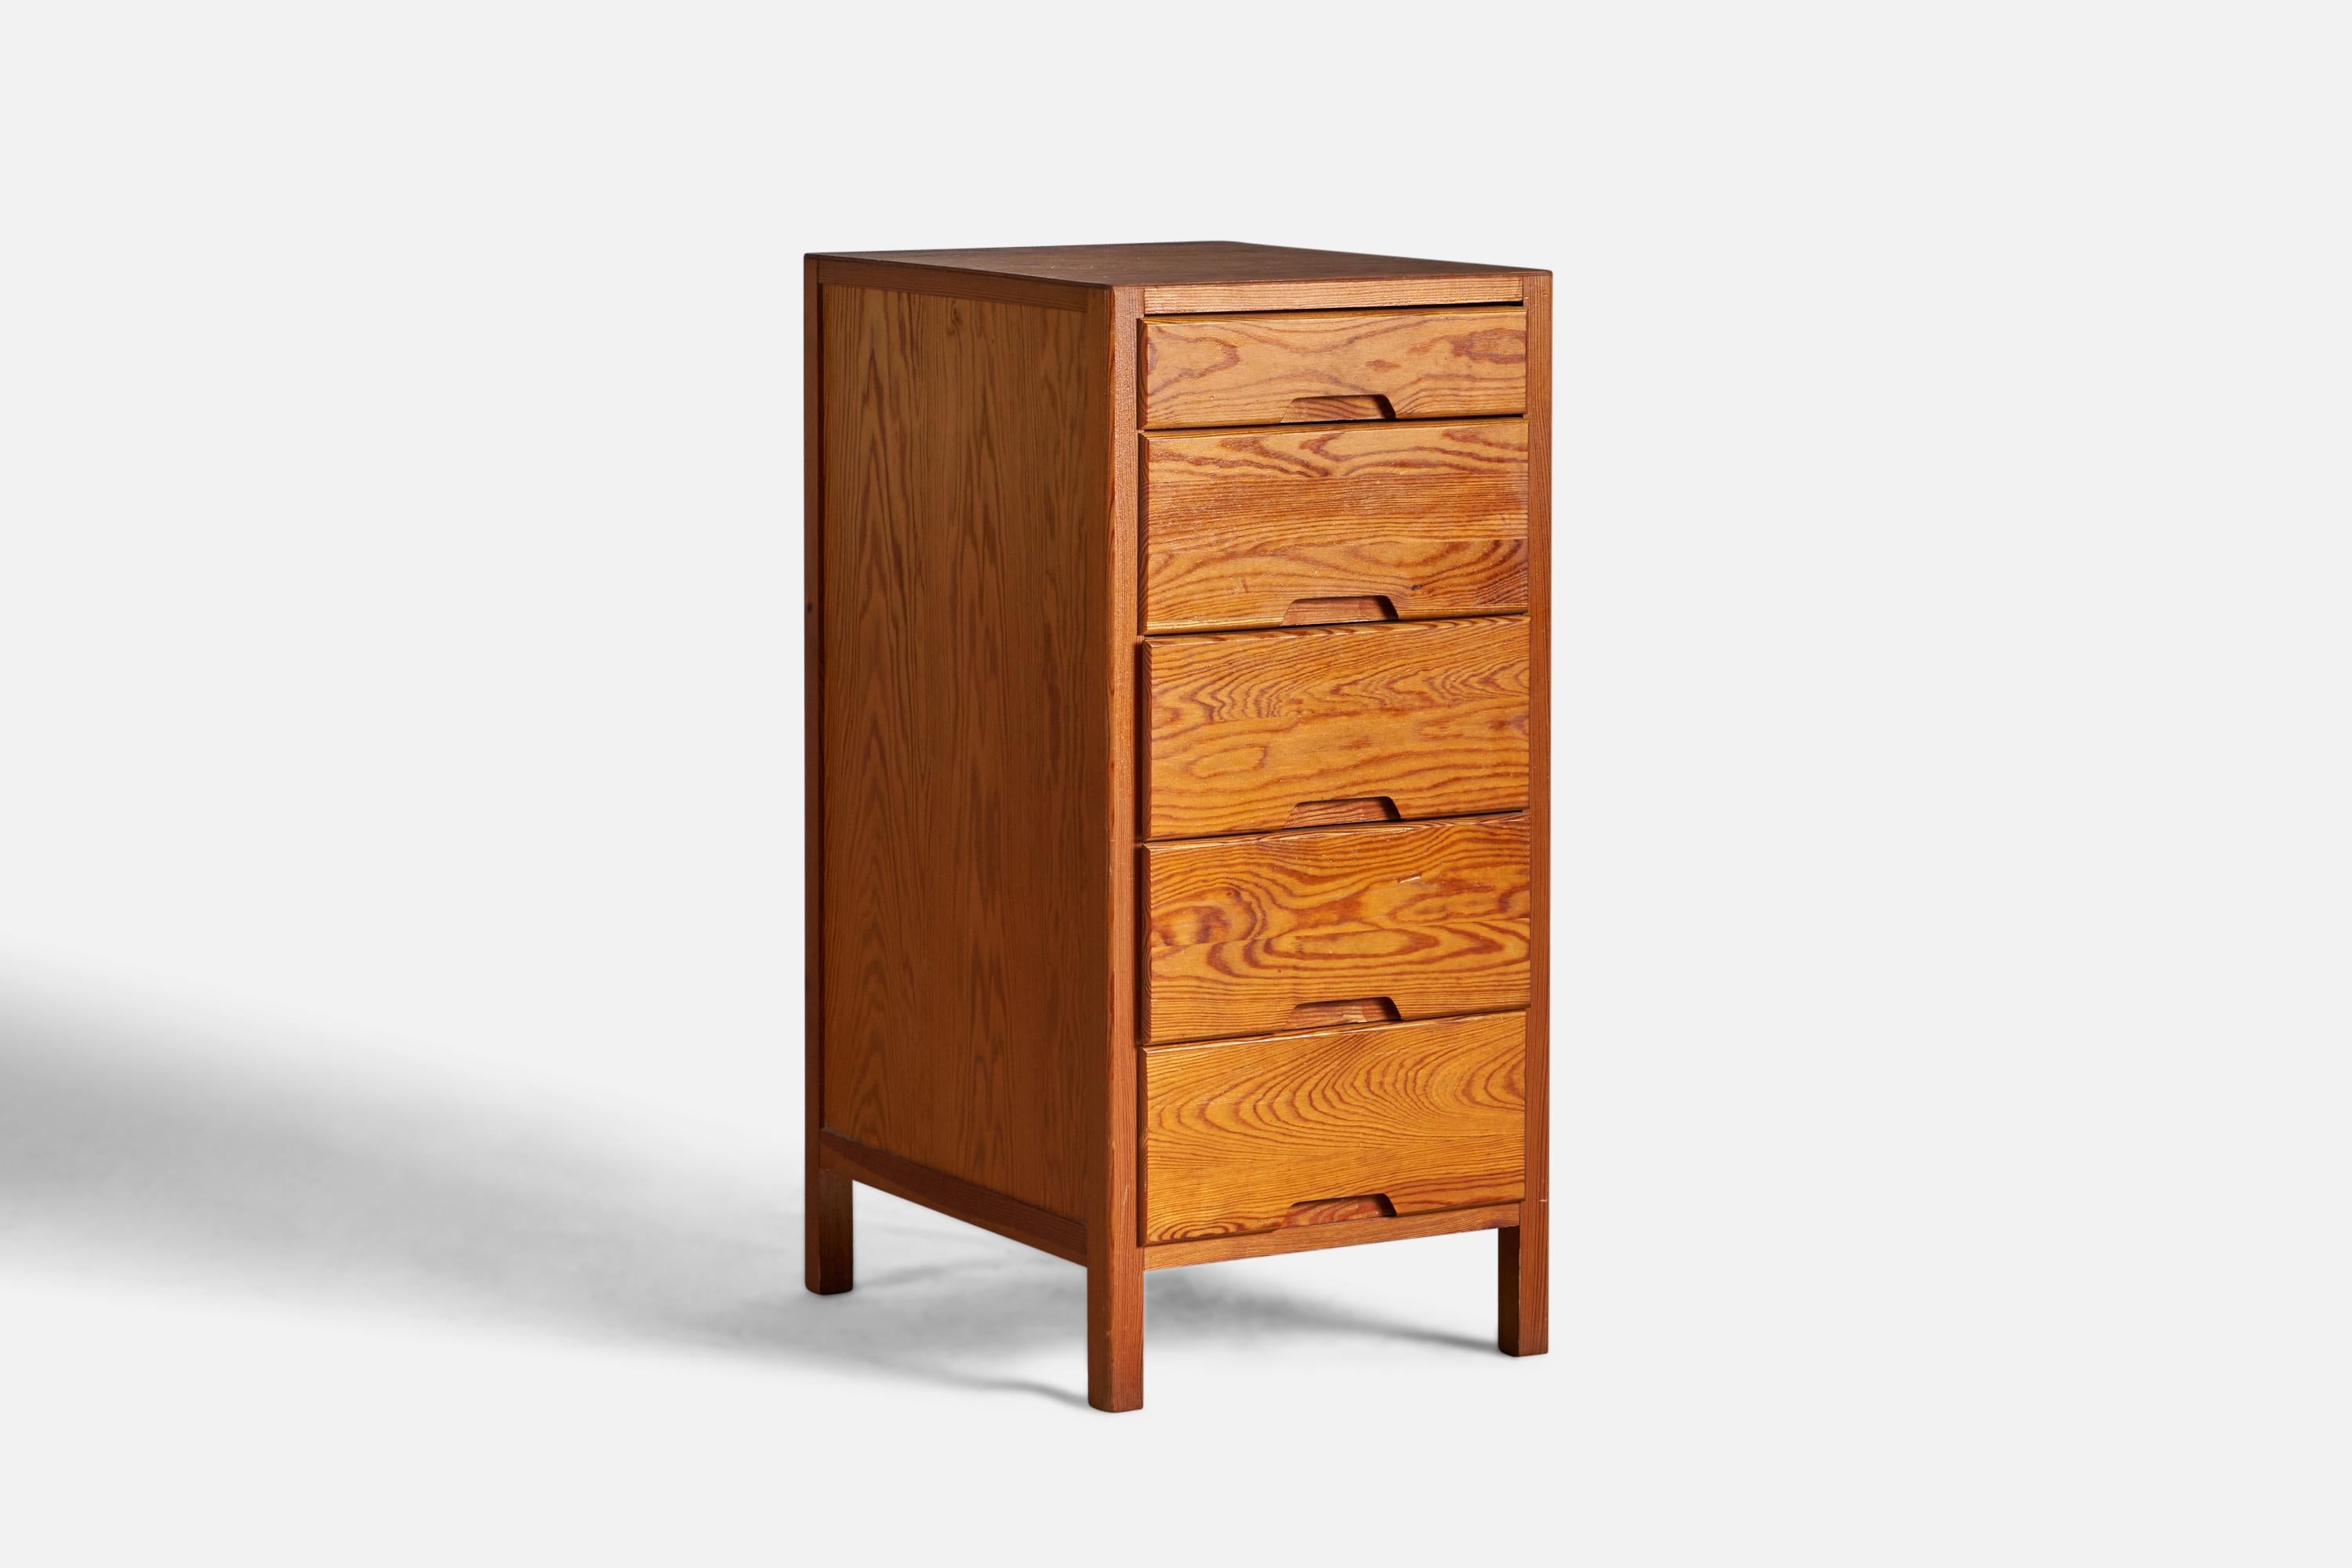 A pine chest of drawers, designed and produced in Sweden, c. 1960s.